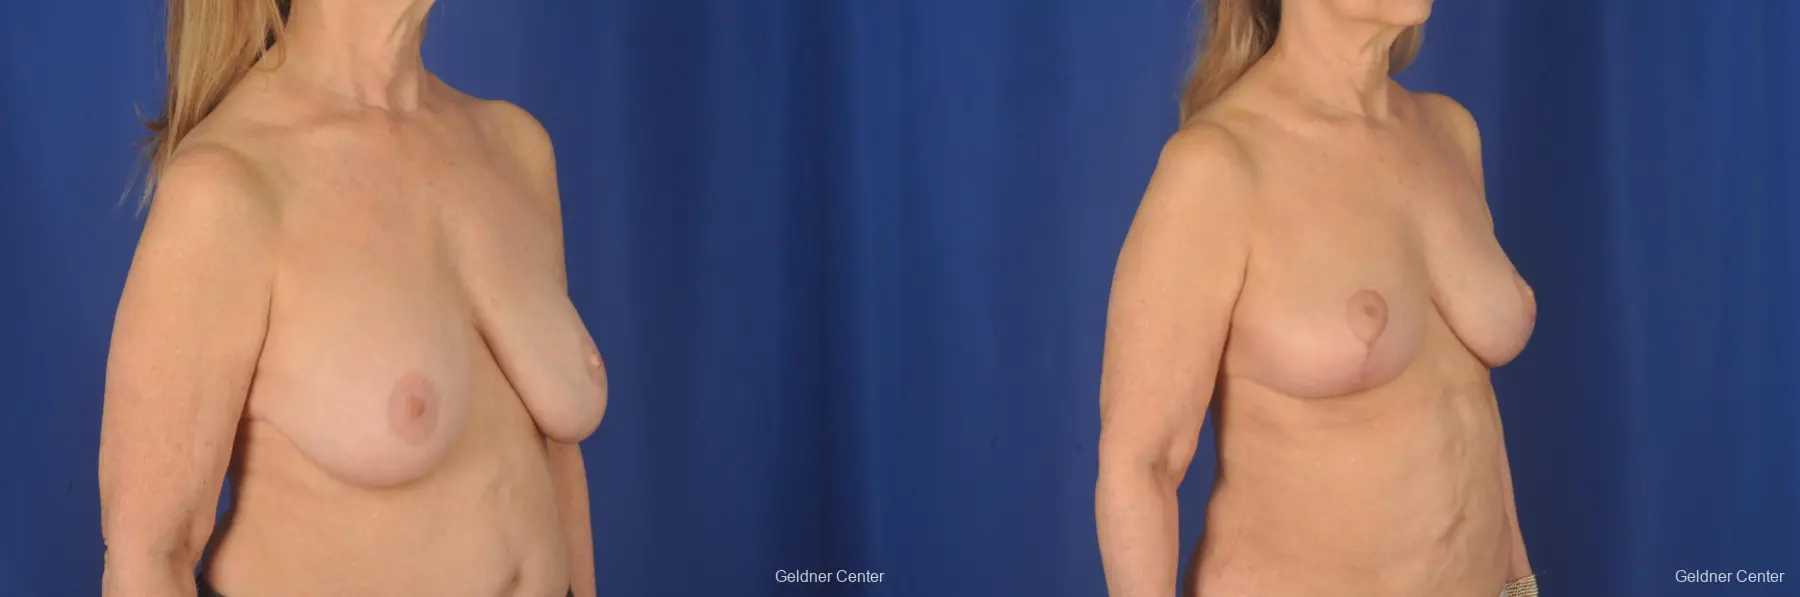 Complex Breast Augmentation: Patient 3 - Before and After 2